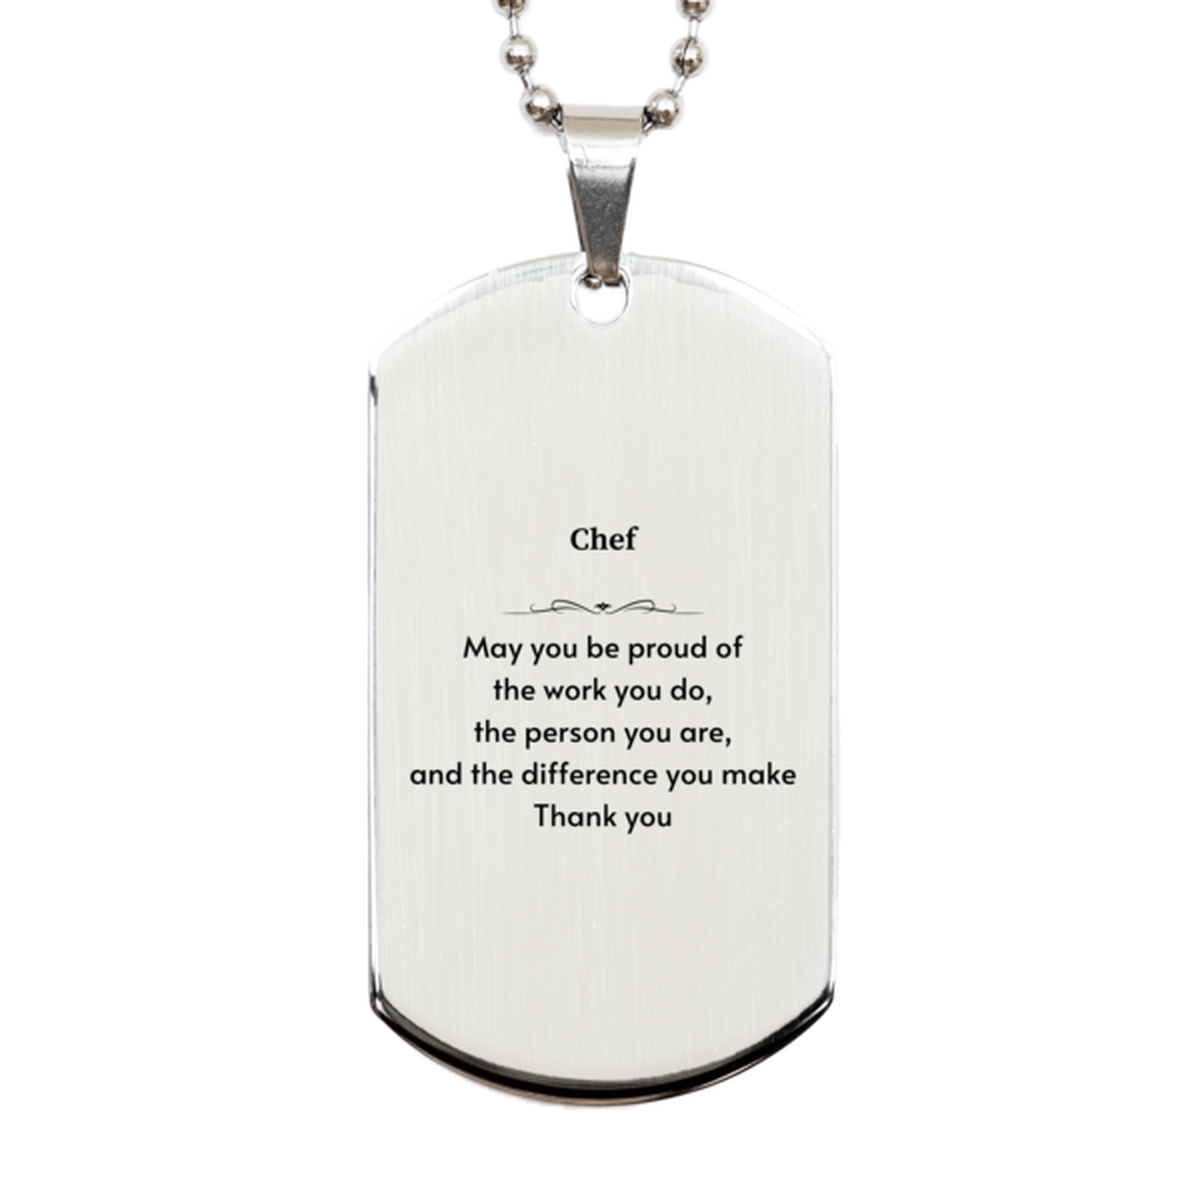 Heartwarming Silver Dog Tag Retirement Coworkers Gifts for Chef, Chef May You be proud of the work you do, the person you are Gifts for Boss Men Women Friends